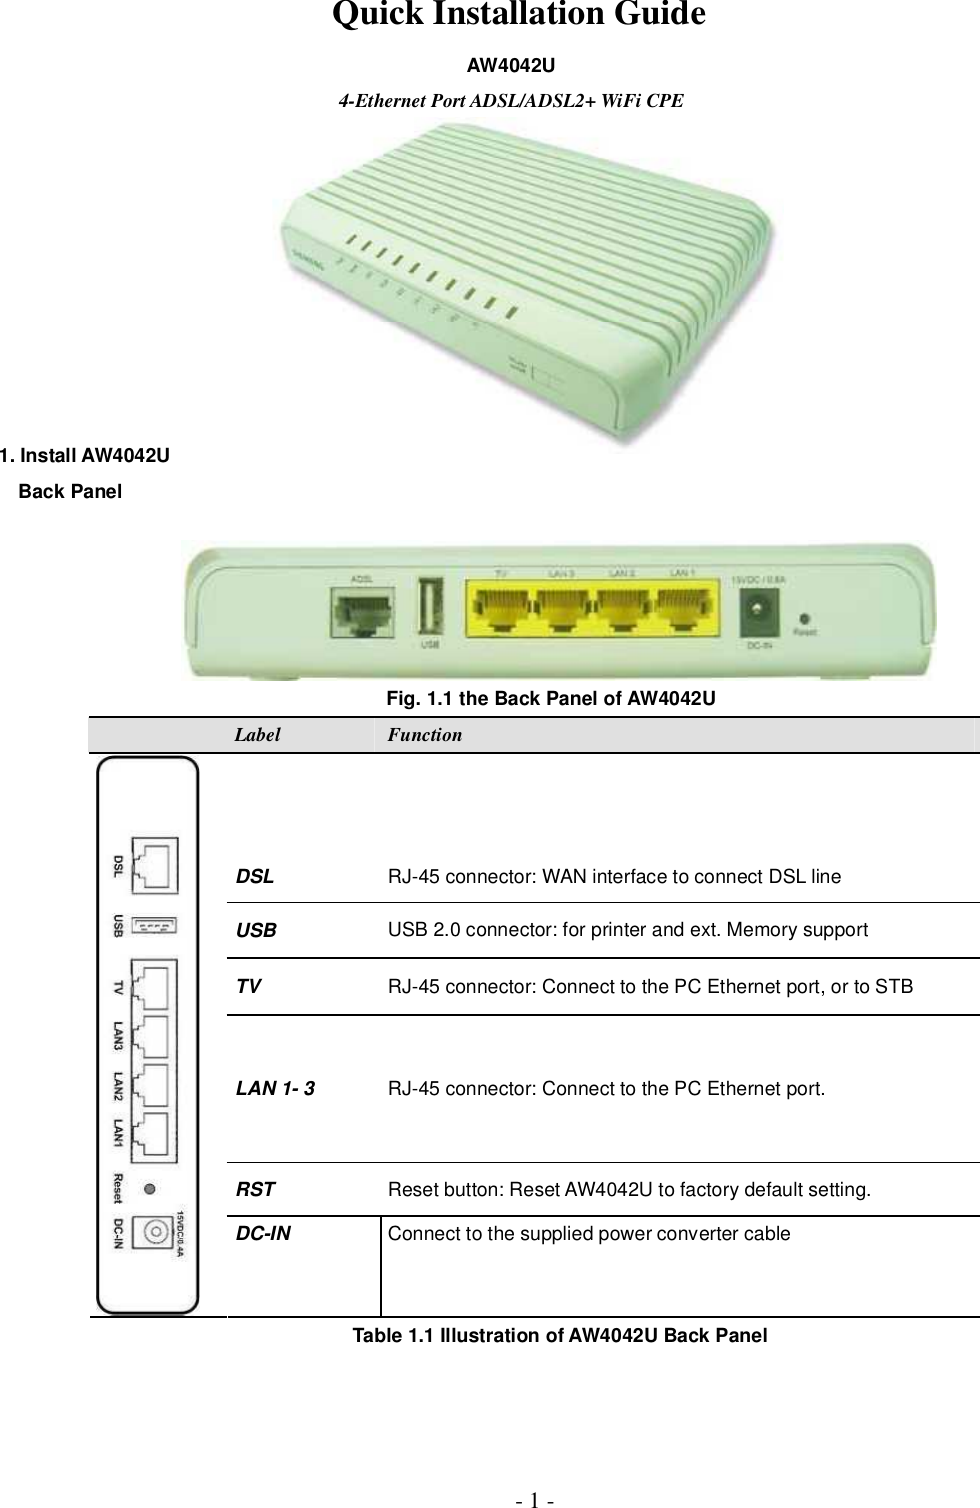 - 1 -Quick Installation GuideAW4042U 4-Ethernet Port ADSL/ADSL2+ WiFi CPE1. Install AW4042U  Back Panel Fig. 1.1 the Back Panel of AW4042U Label FunctionDSL RJ-45 connector: WAN interface to connect DSL line USB USB 2.0 connector: for printer and ext. Memory support TV RJ-45 connector: Connect to the PC Ethernet port, or to STB LAN 1- 3  RJ-45 connector: Connect to the PC Ethernet port. RST Reset button: Reset AW4042U to factory default setting. DC-IN  Connect to the supplied power converter cable Table 1.1 Illustration of AW4042U Back Panel 